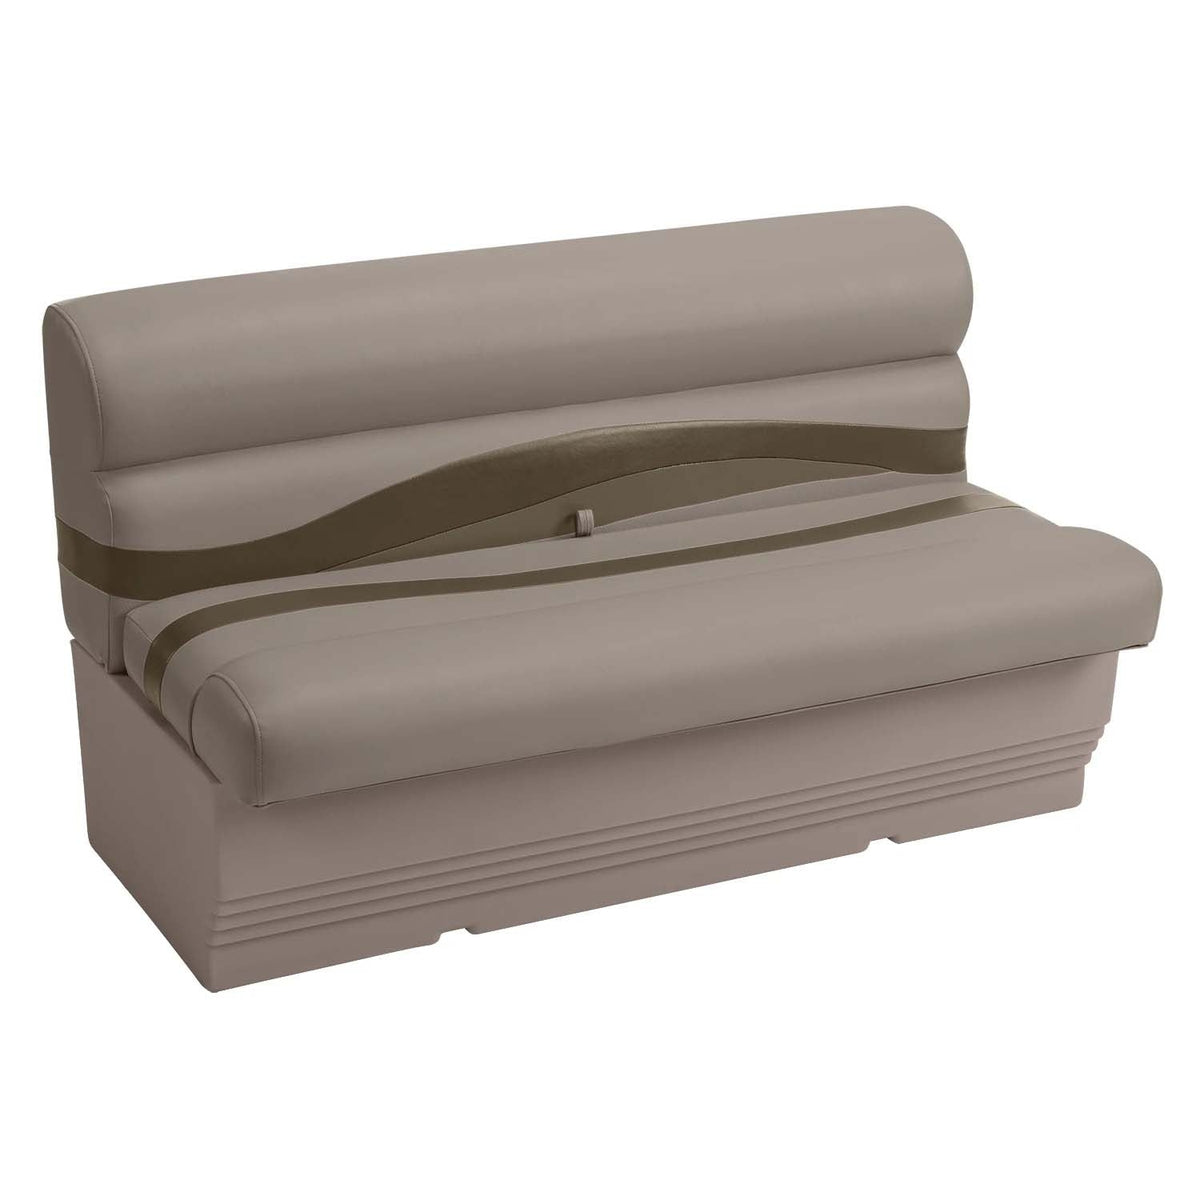 Wise Not Qualified for Free Shipping Wise 50" Bench Seat with Base #BM1145-1749